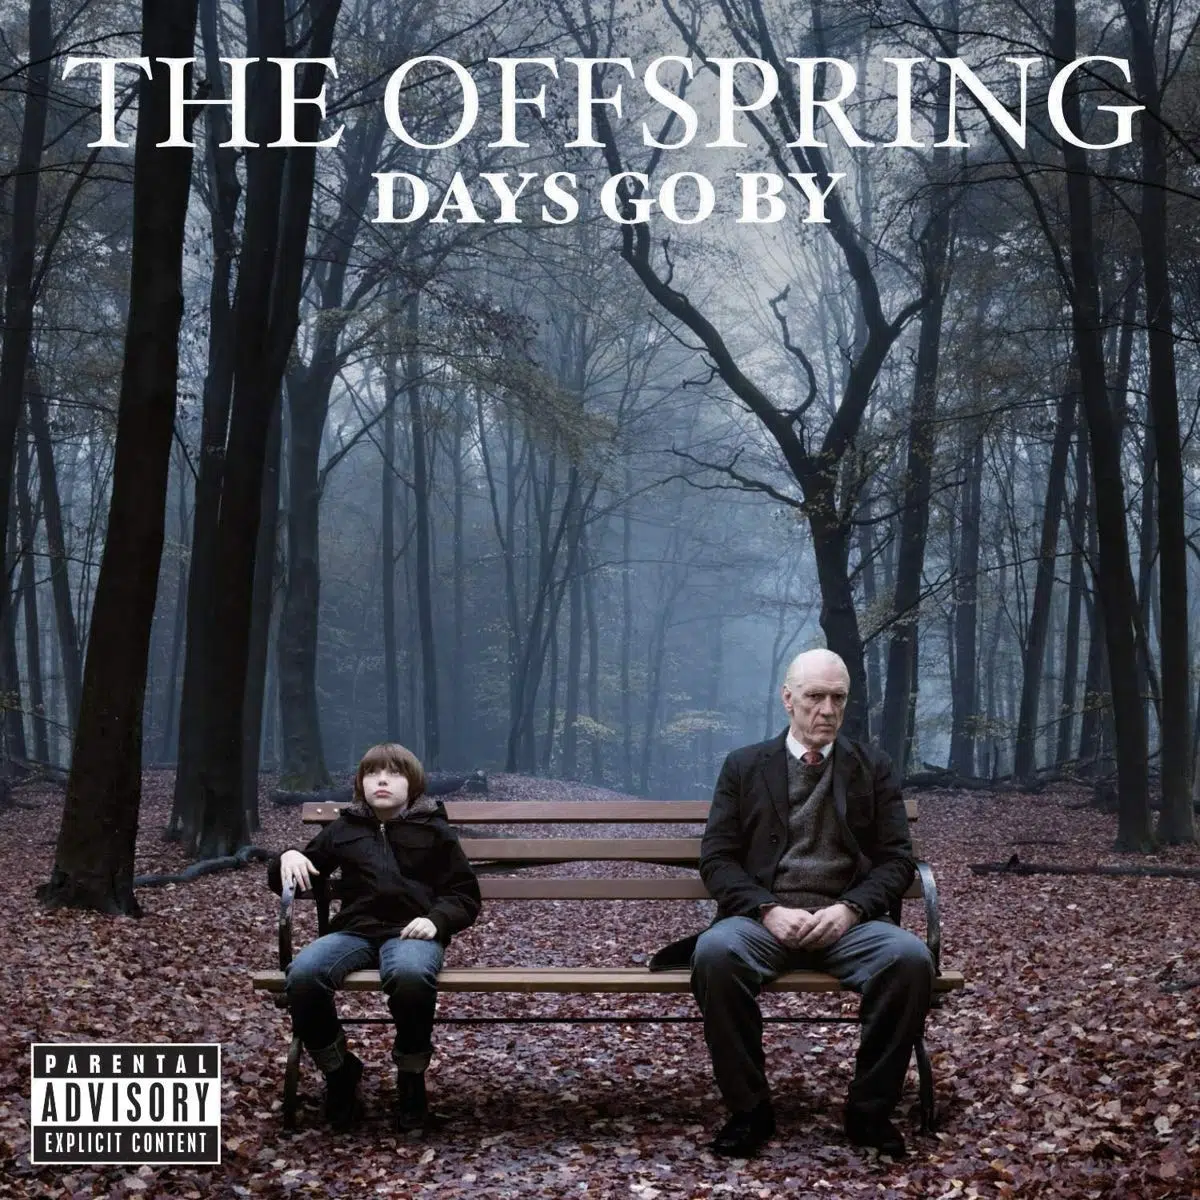 The Offspring Days Go By